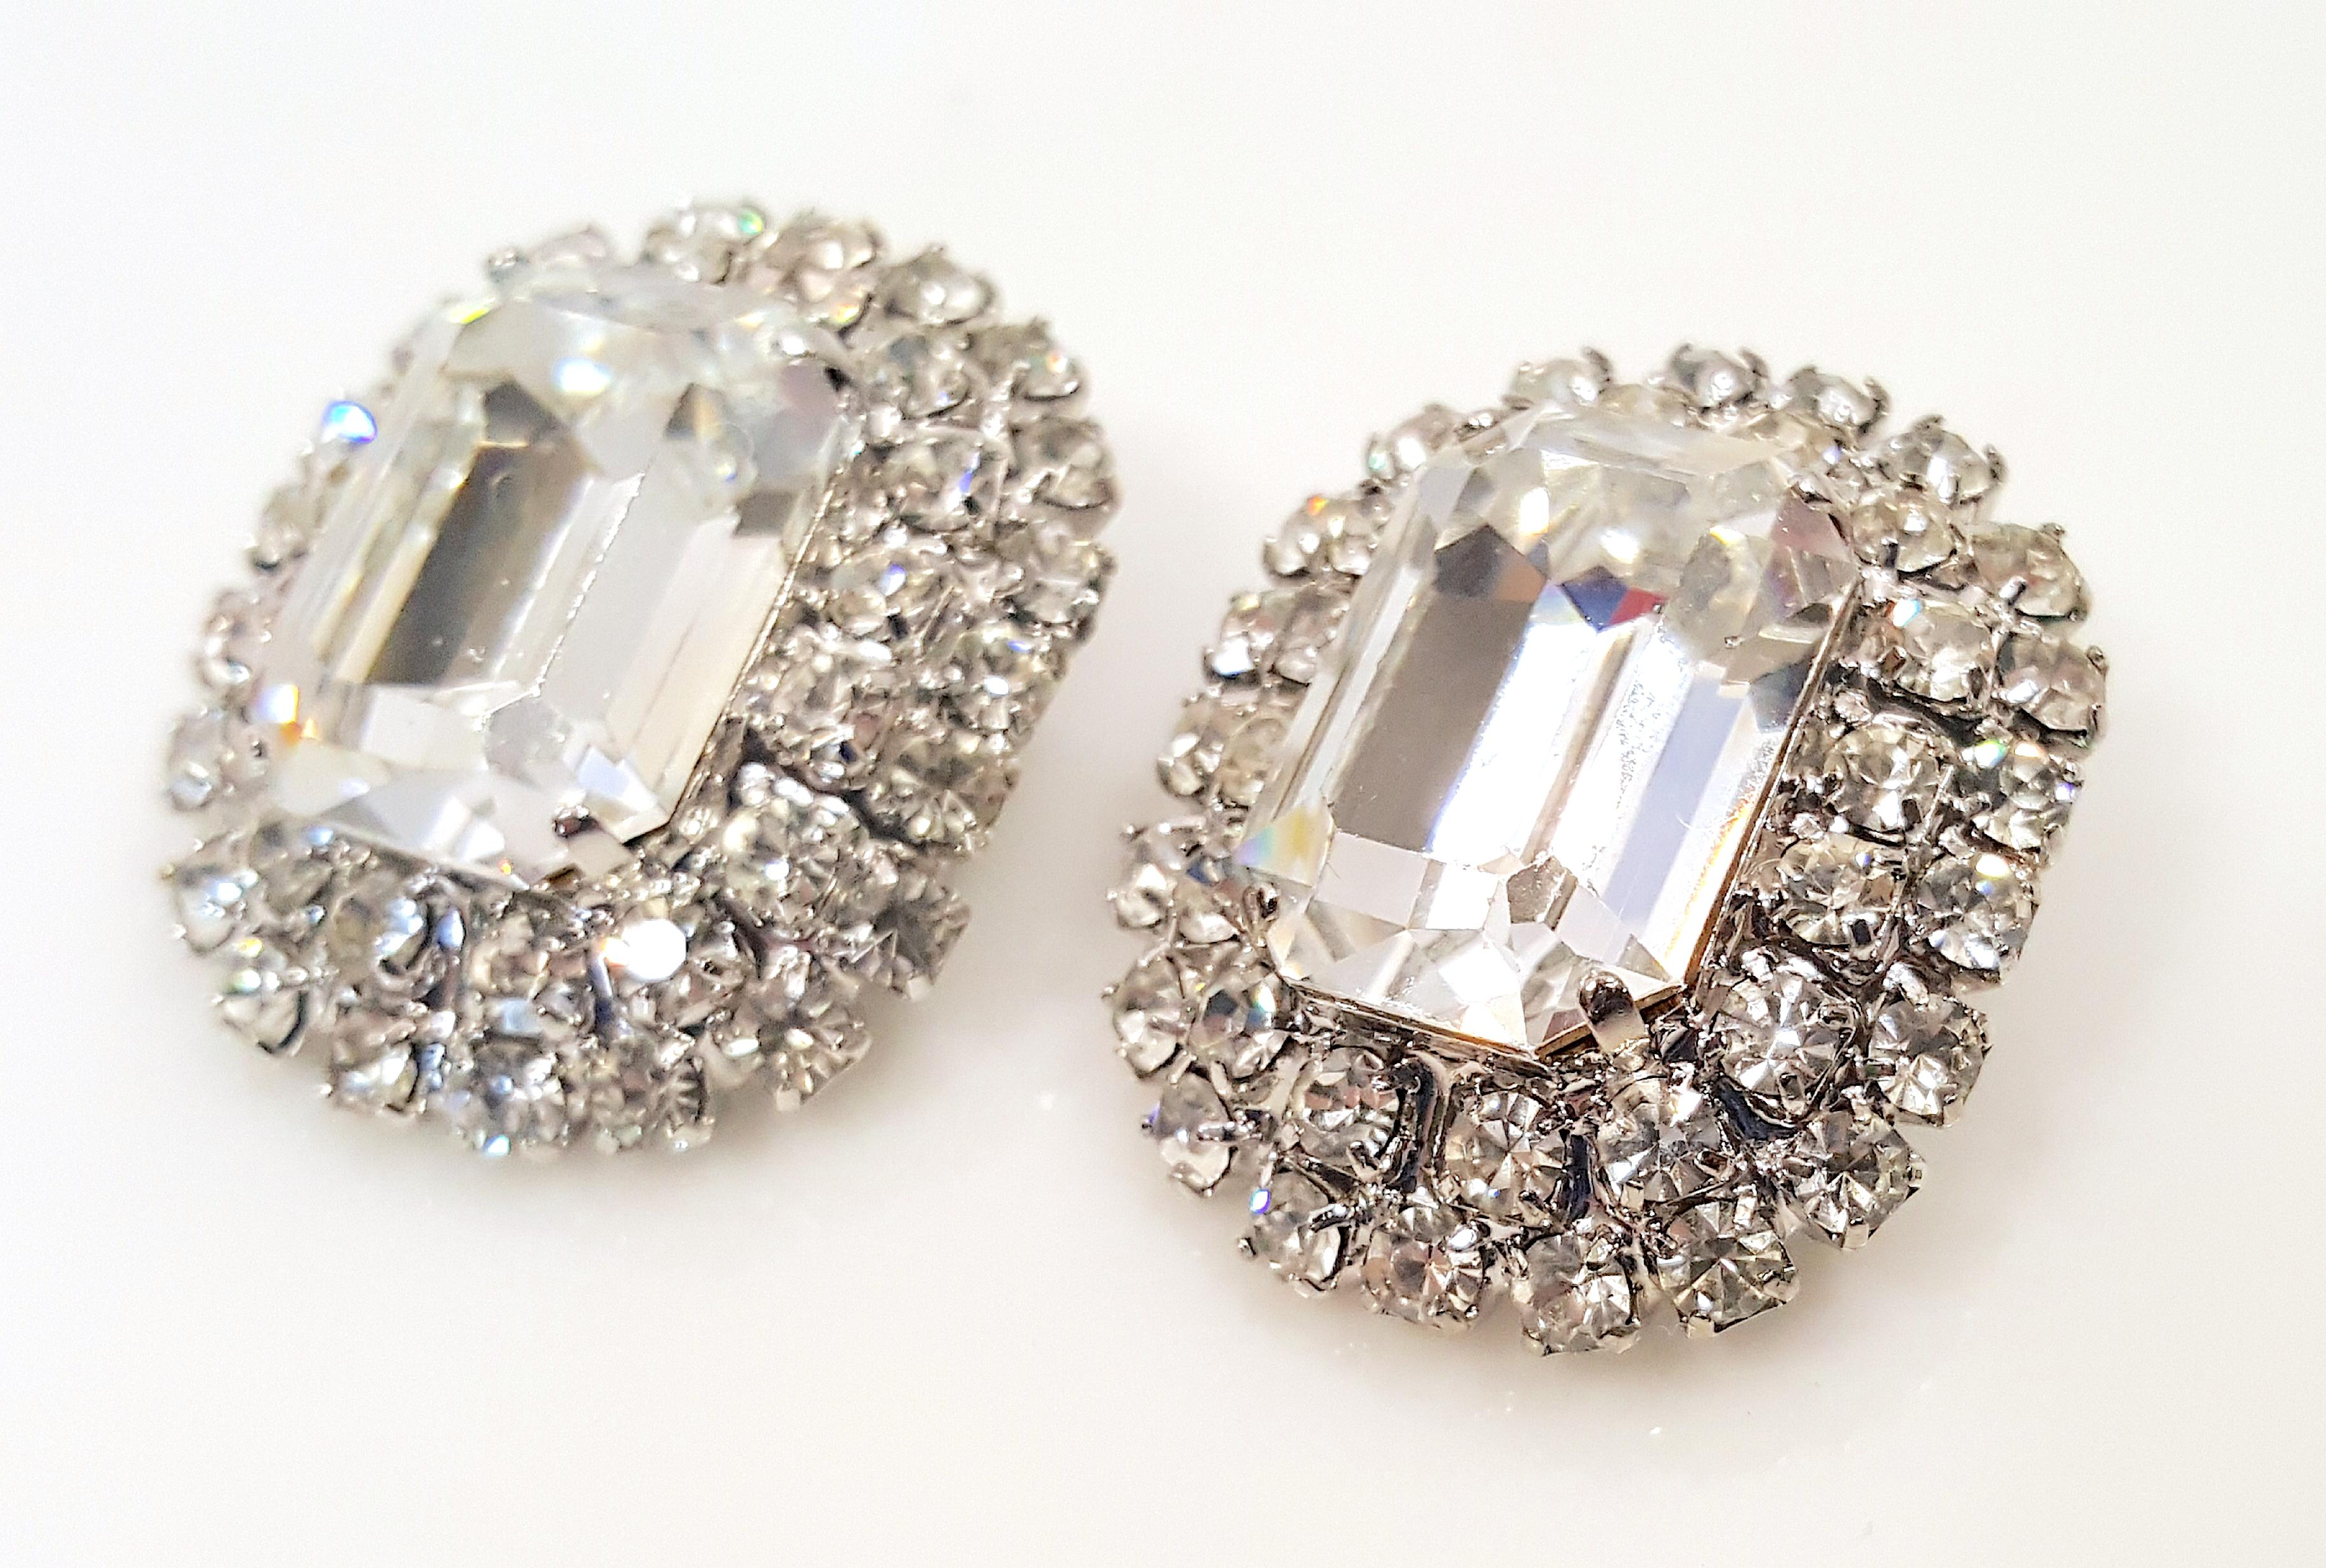 Couture 1950s WestGermany DiorDesigner Crystal DoubleTrimmed EmeraldCut Earrings In Excellent Condition For Sale In Chicago, IL